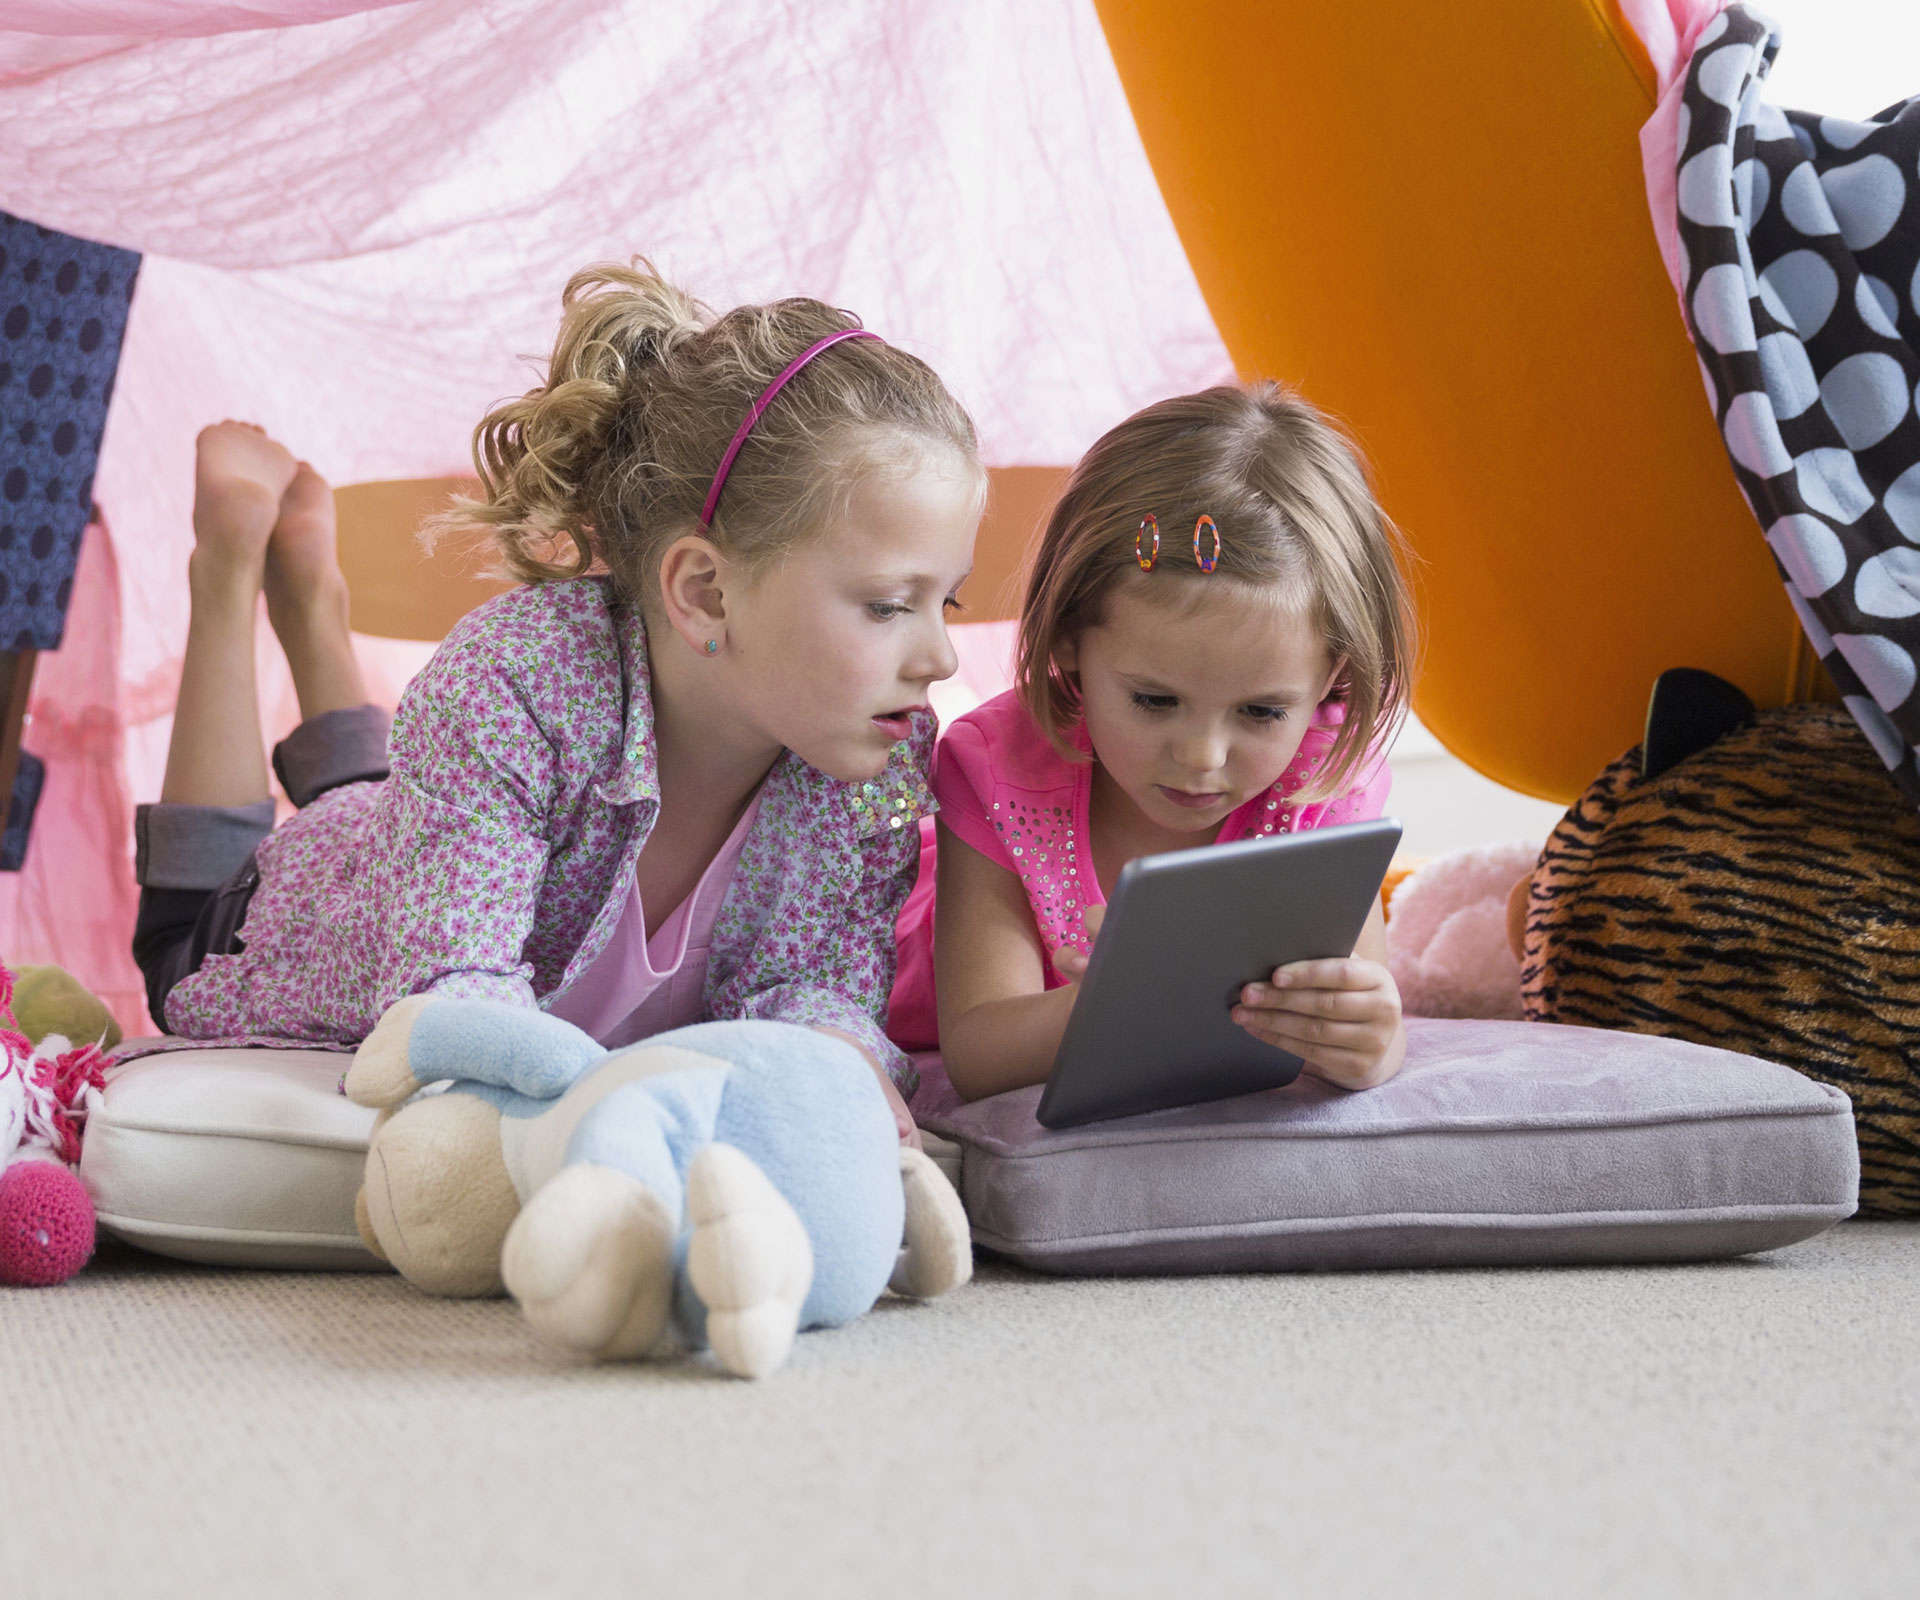 How much screen time is dangerous for kids?